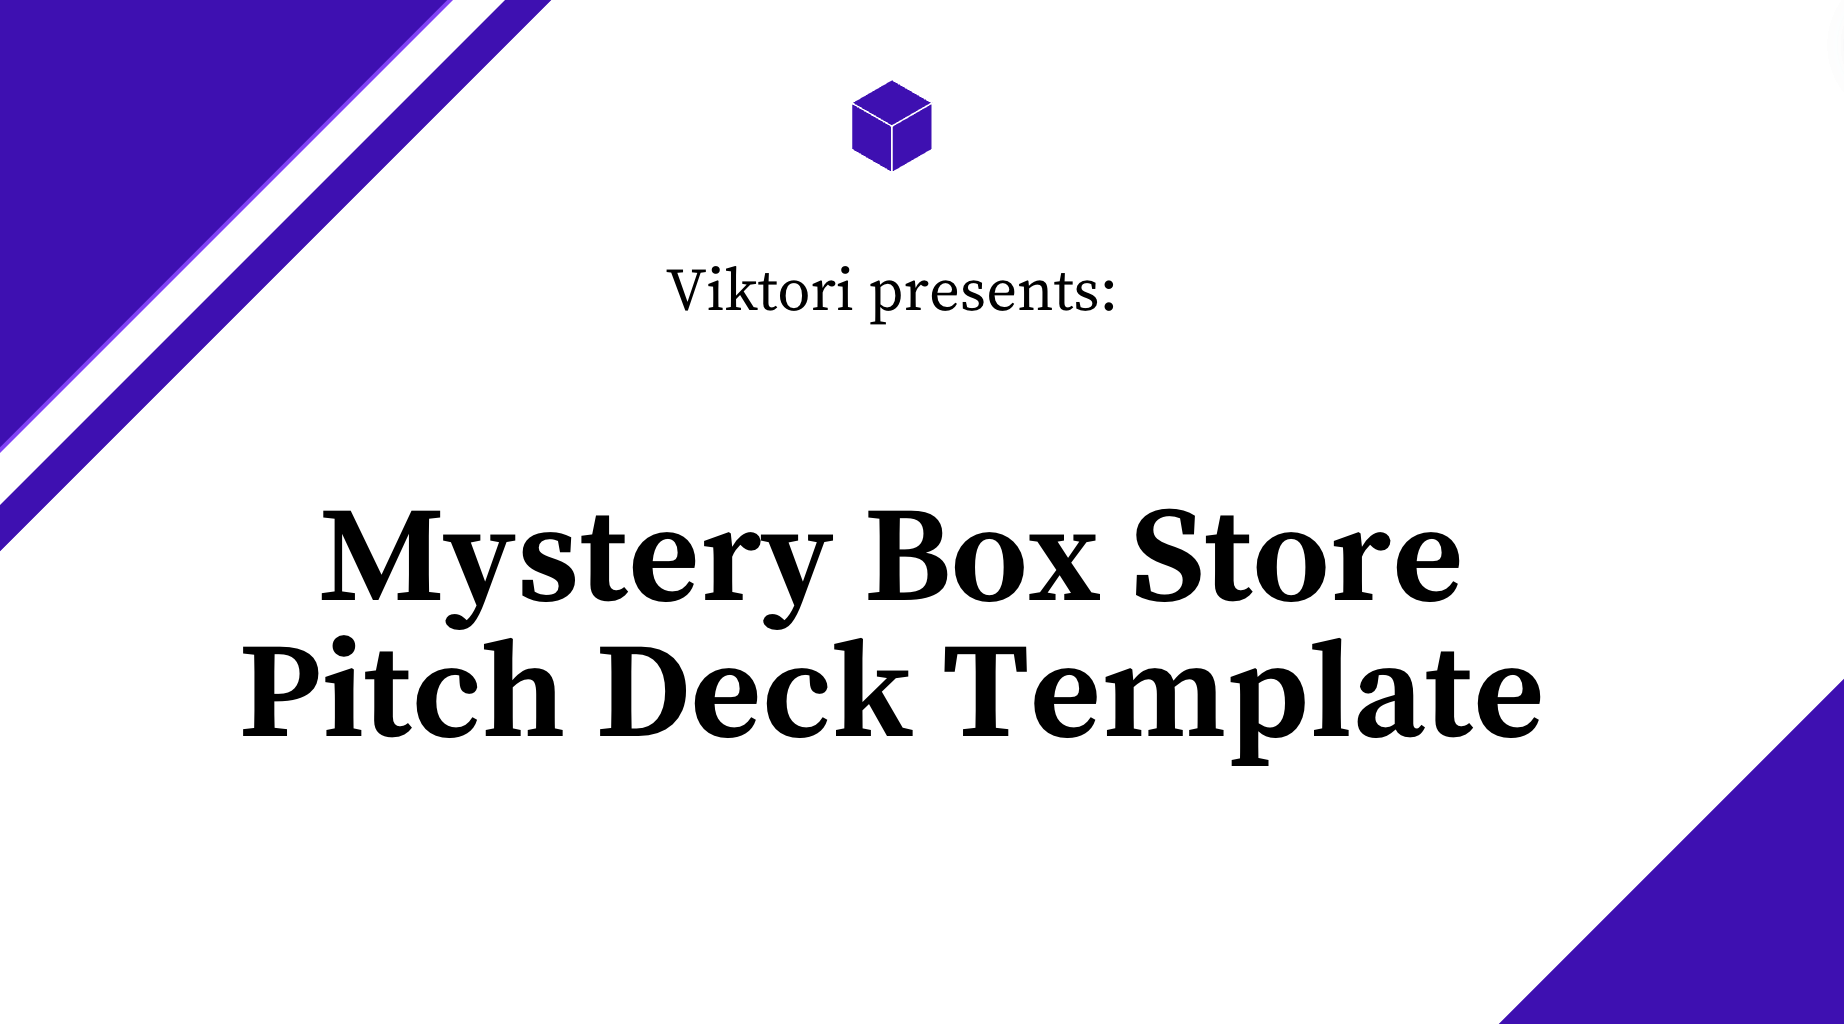 12 Slide E-Commerce Pitch Deck Template For A Mystery Box Store